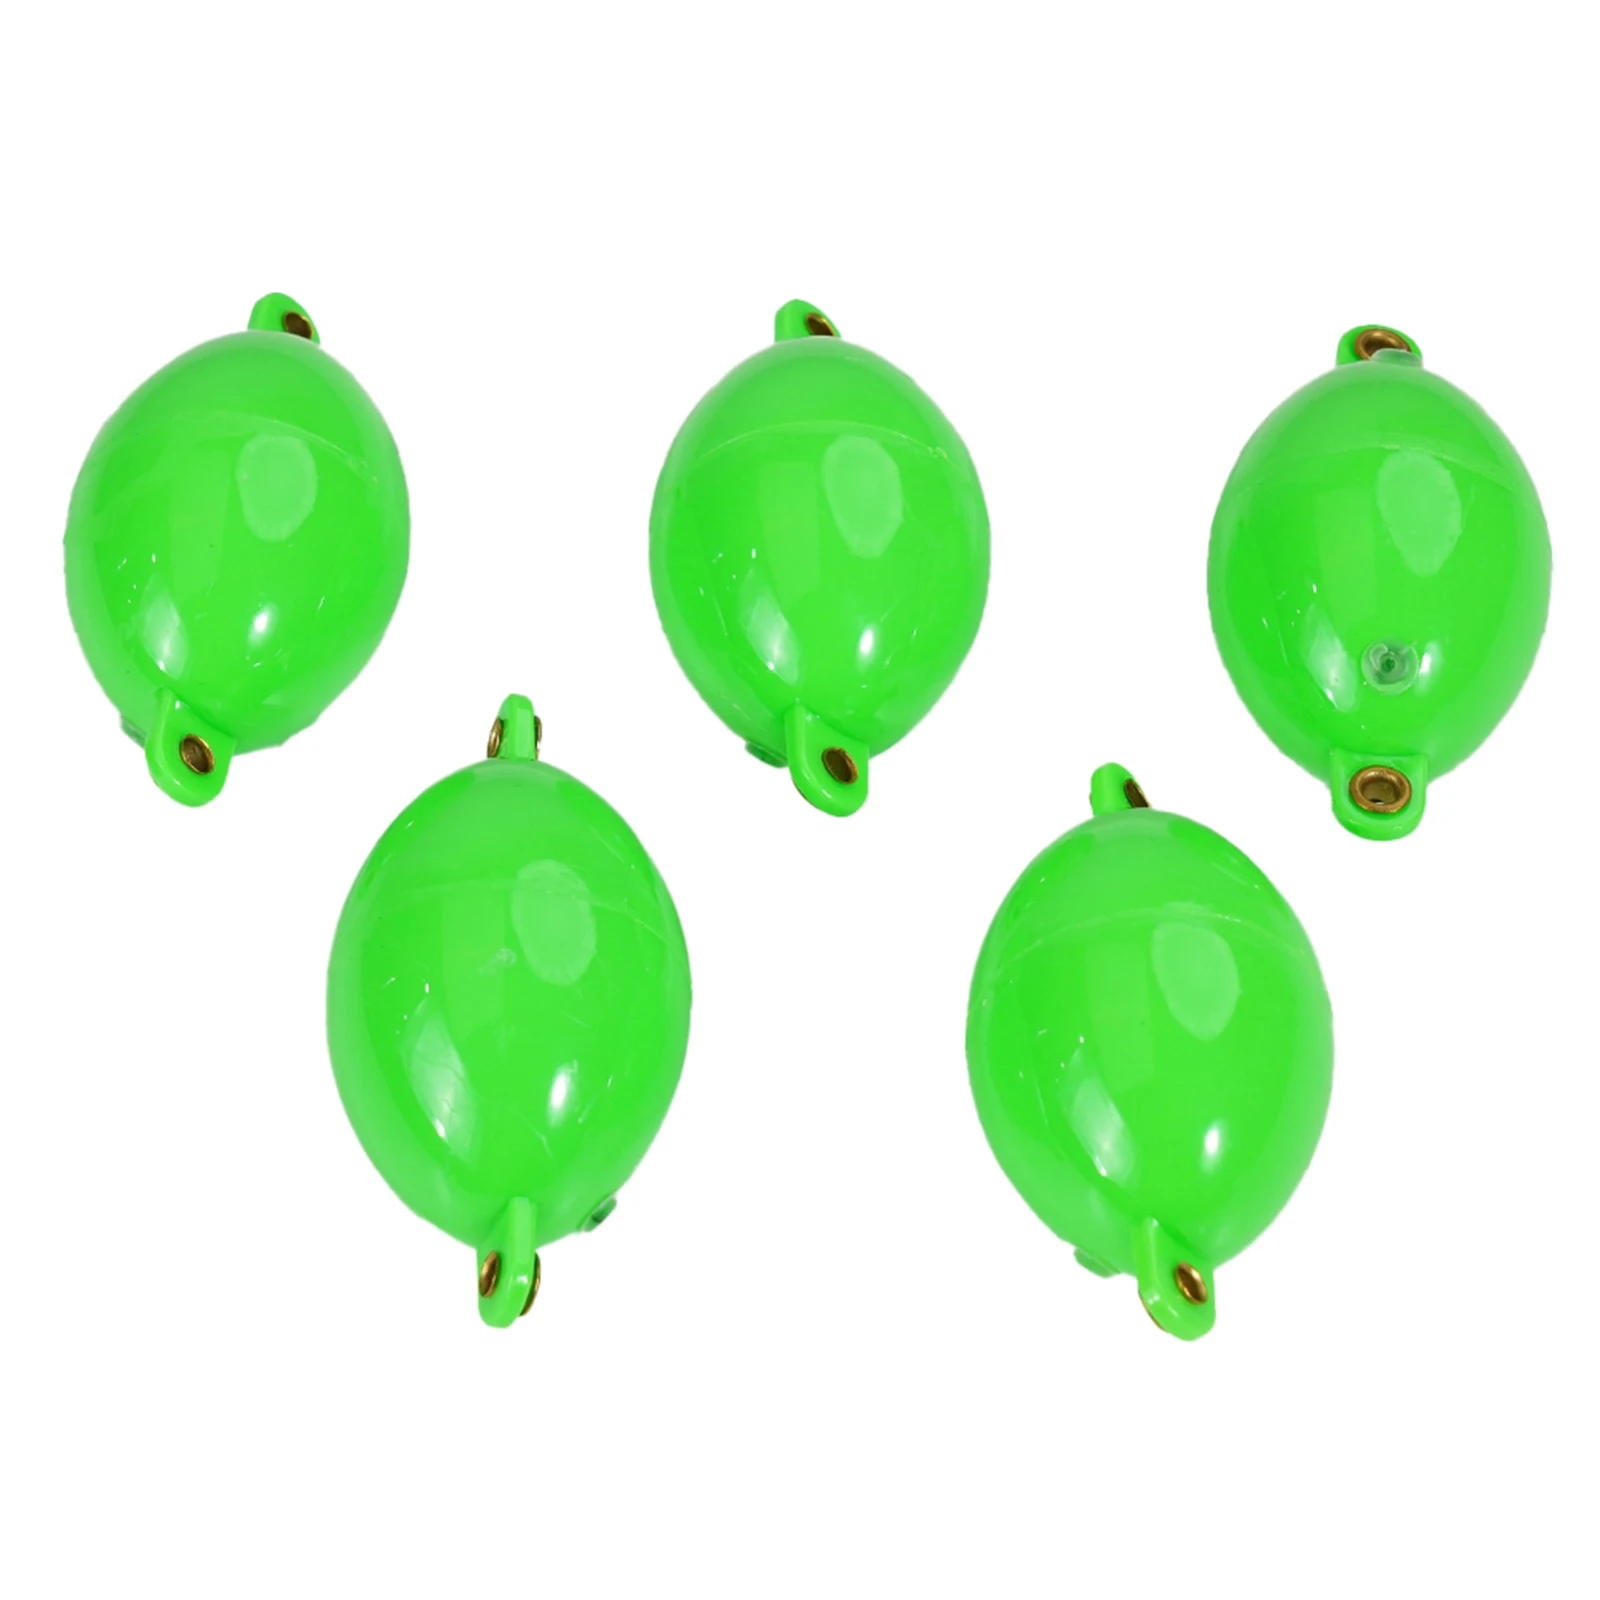 5Pcs Fishing Float PVC Lure Hollow Ball Water Ball Floating Bubble Tackle Sea River Fishing Gears Controller Accessories enlarge